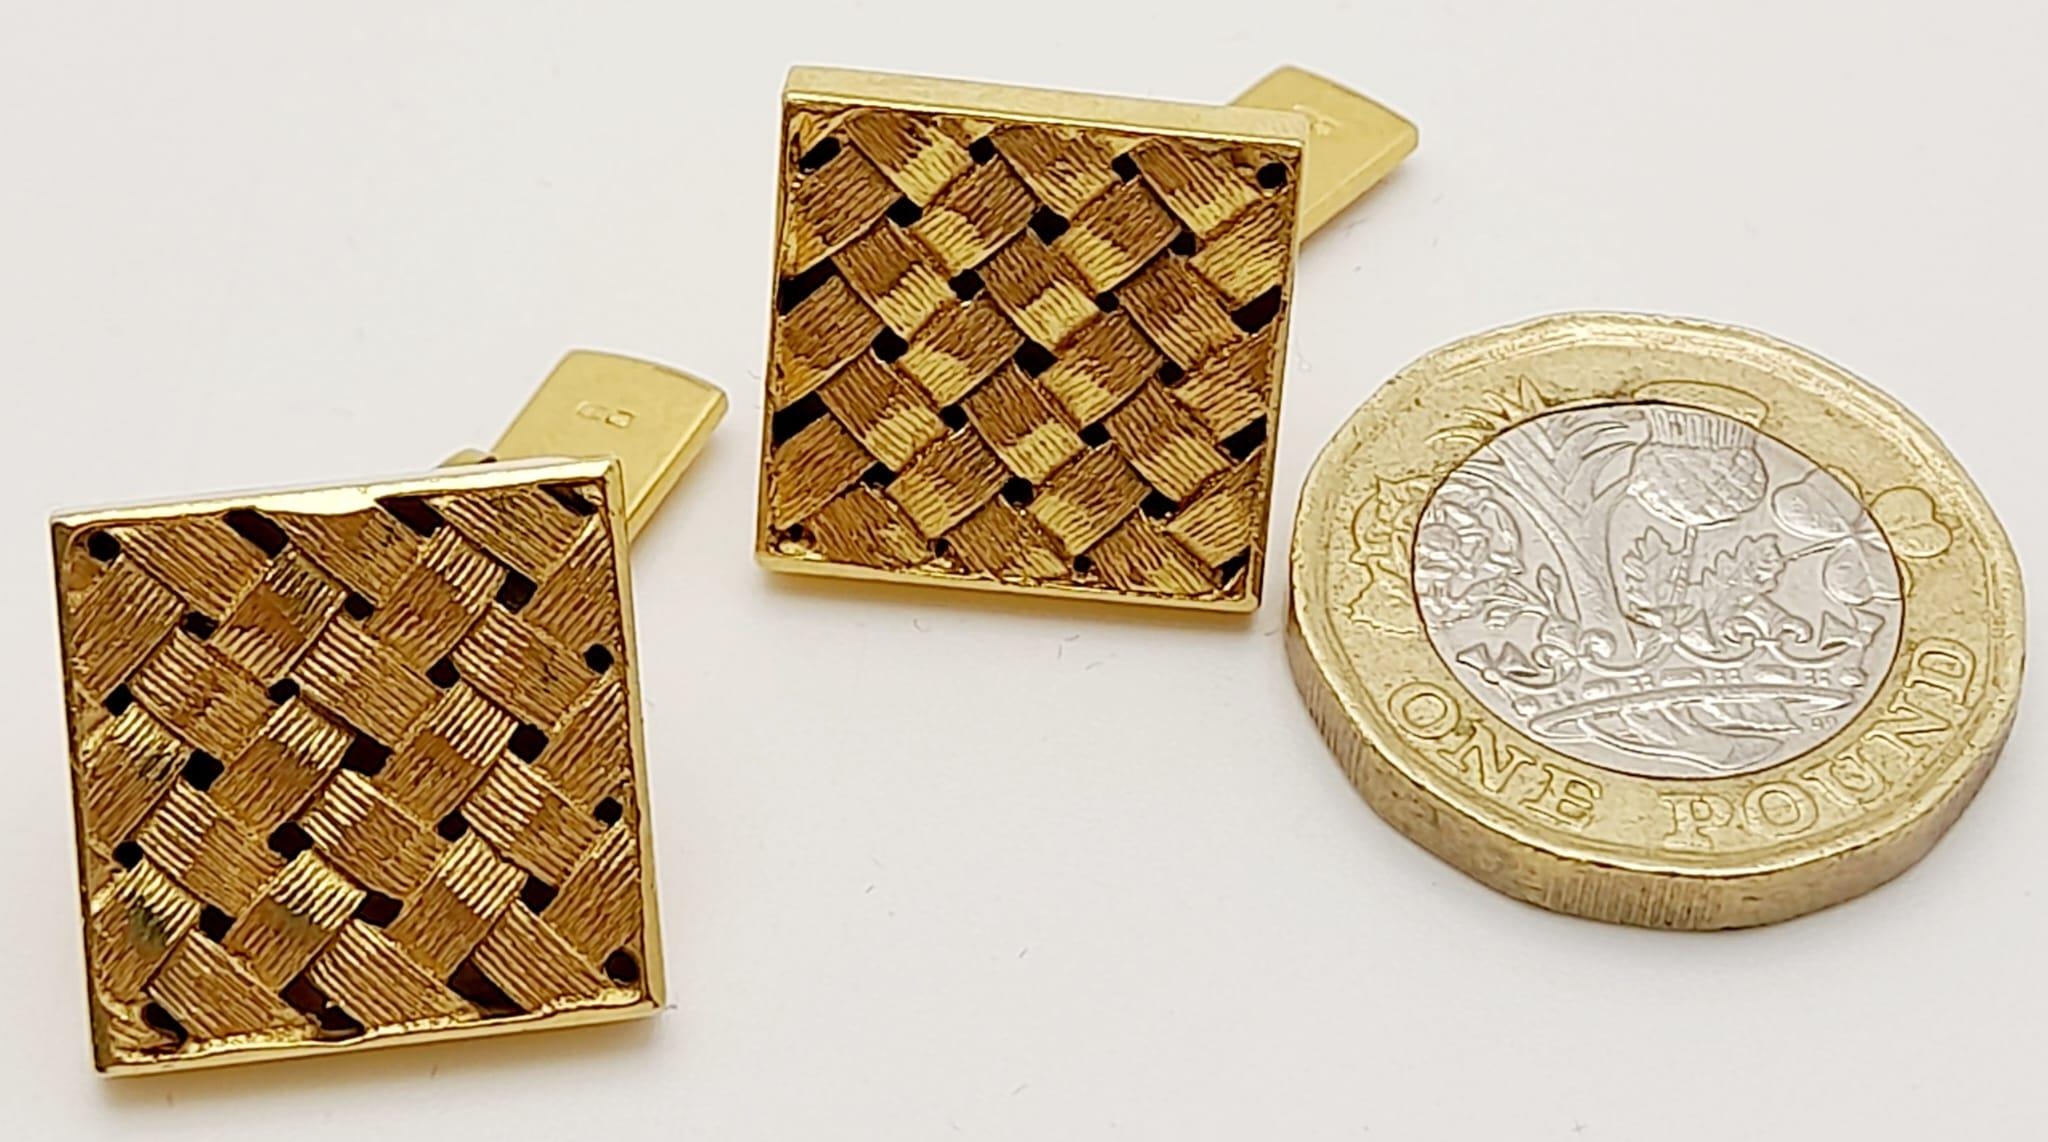 A PAIR OF 18K GOLD CARTIER STYLE CUFFLINKS WITH U.K. HALLMARK . 16.5gms - Image 5 of 6